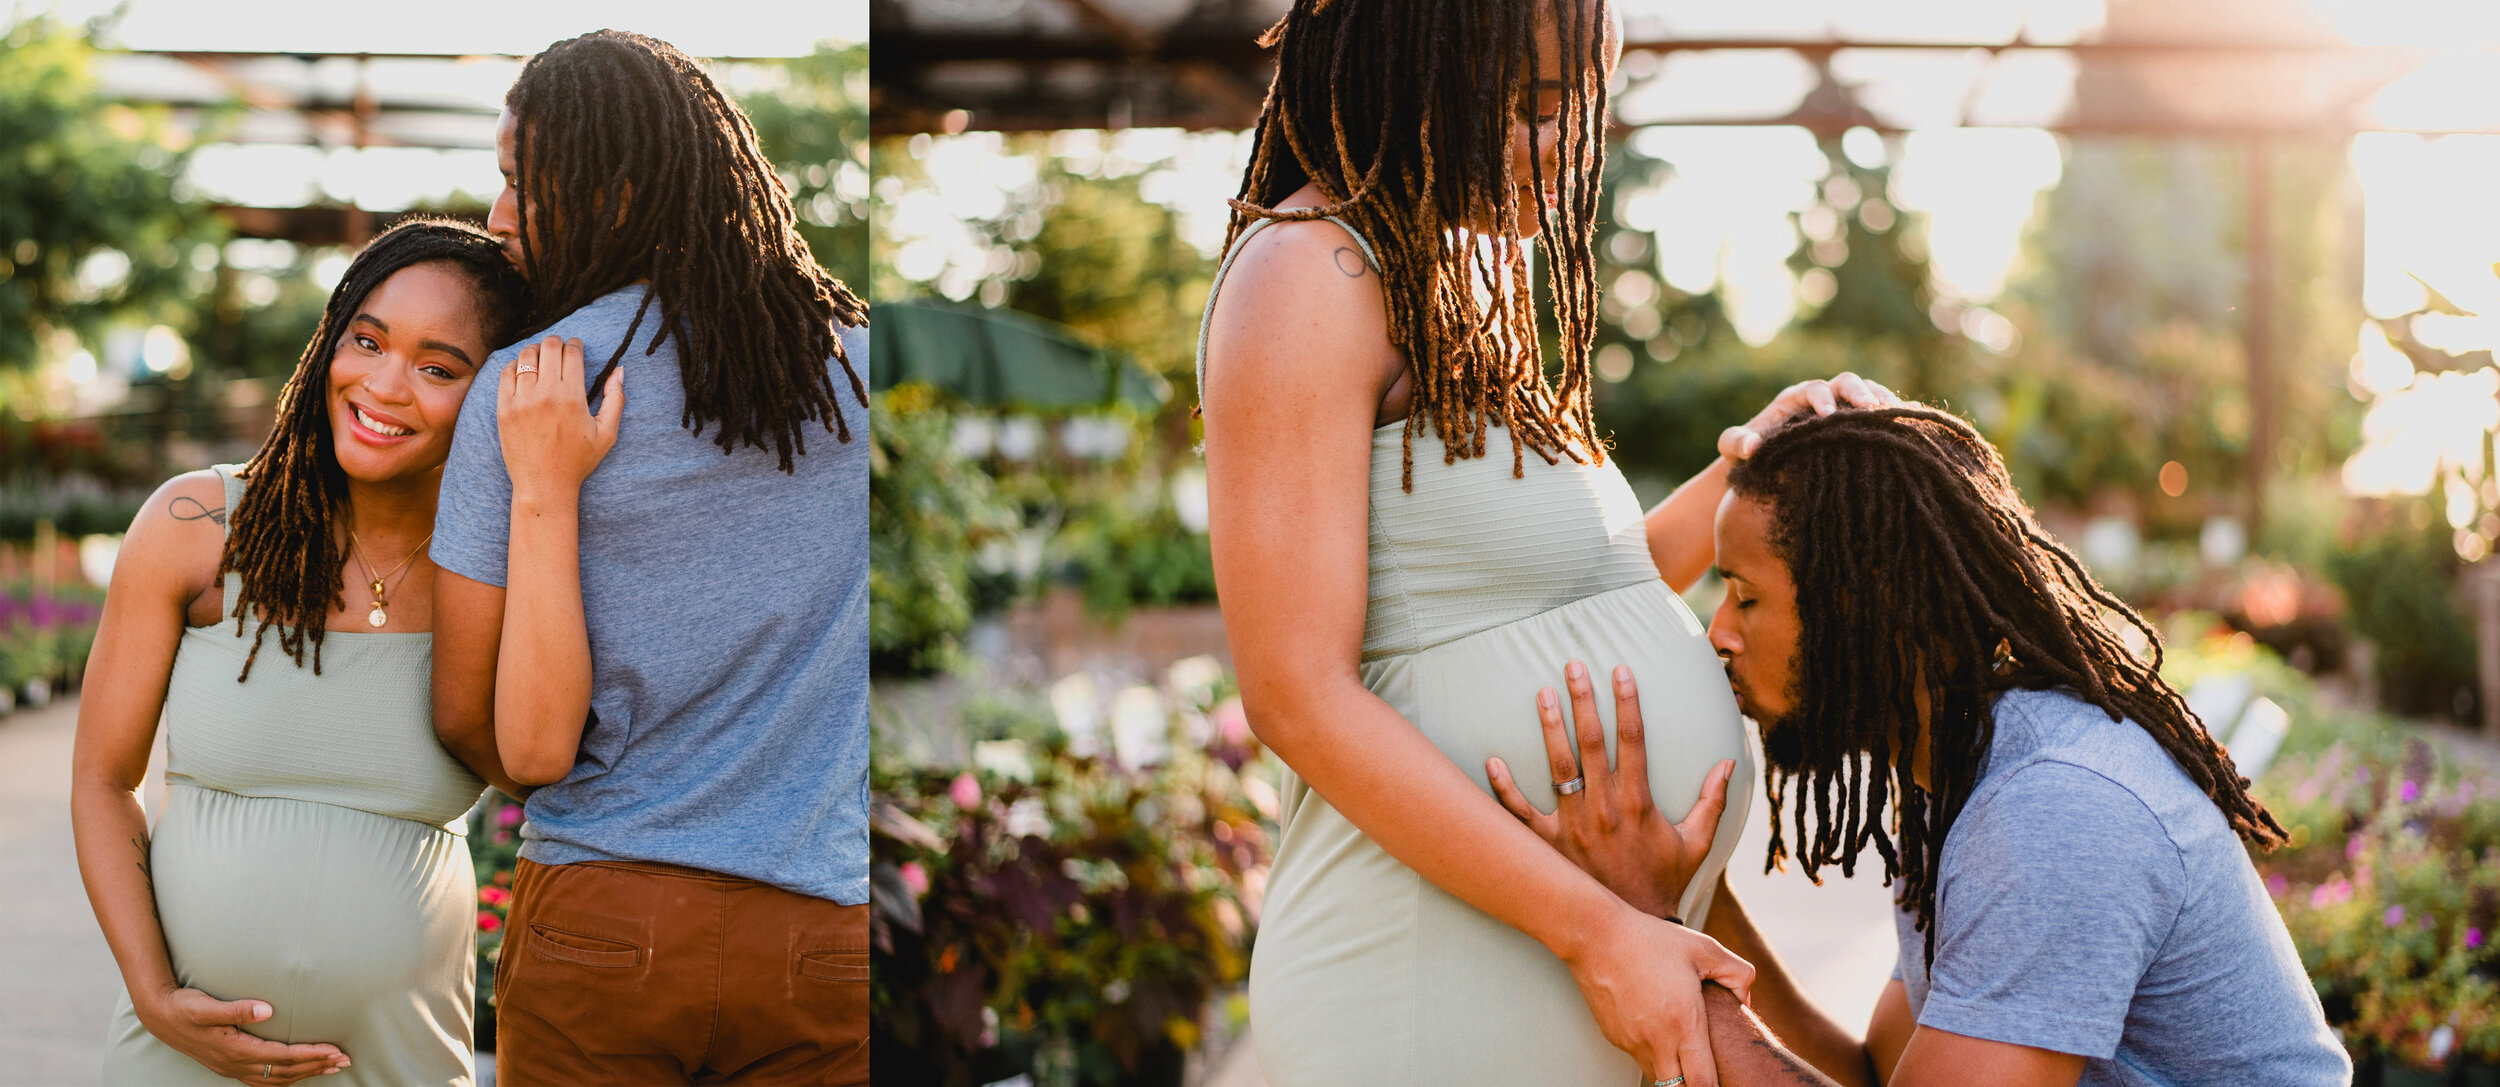 Kansas City Maternity Photographer EffJay Photography Session at Colonial Gardens in Blue Springs021.jpg